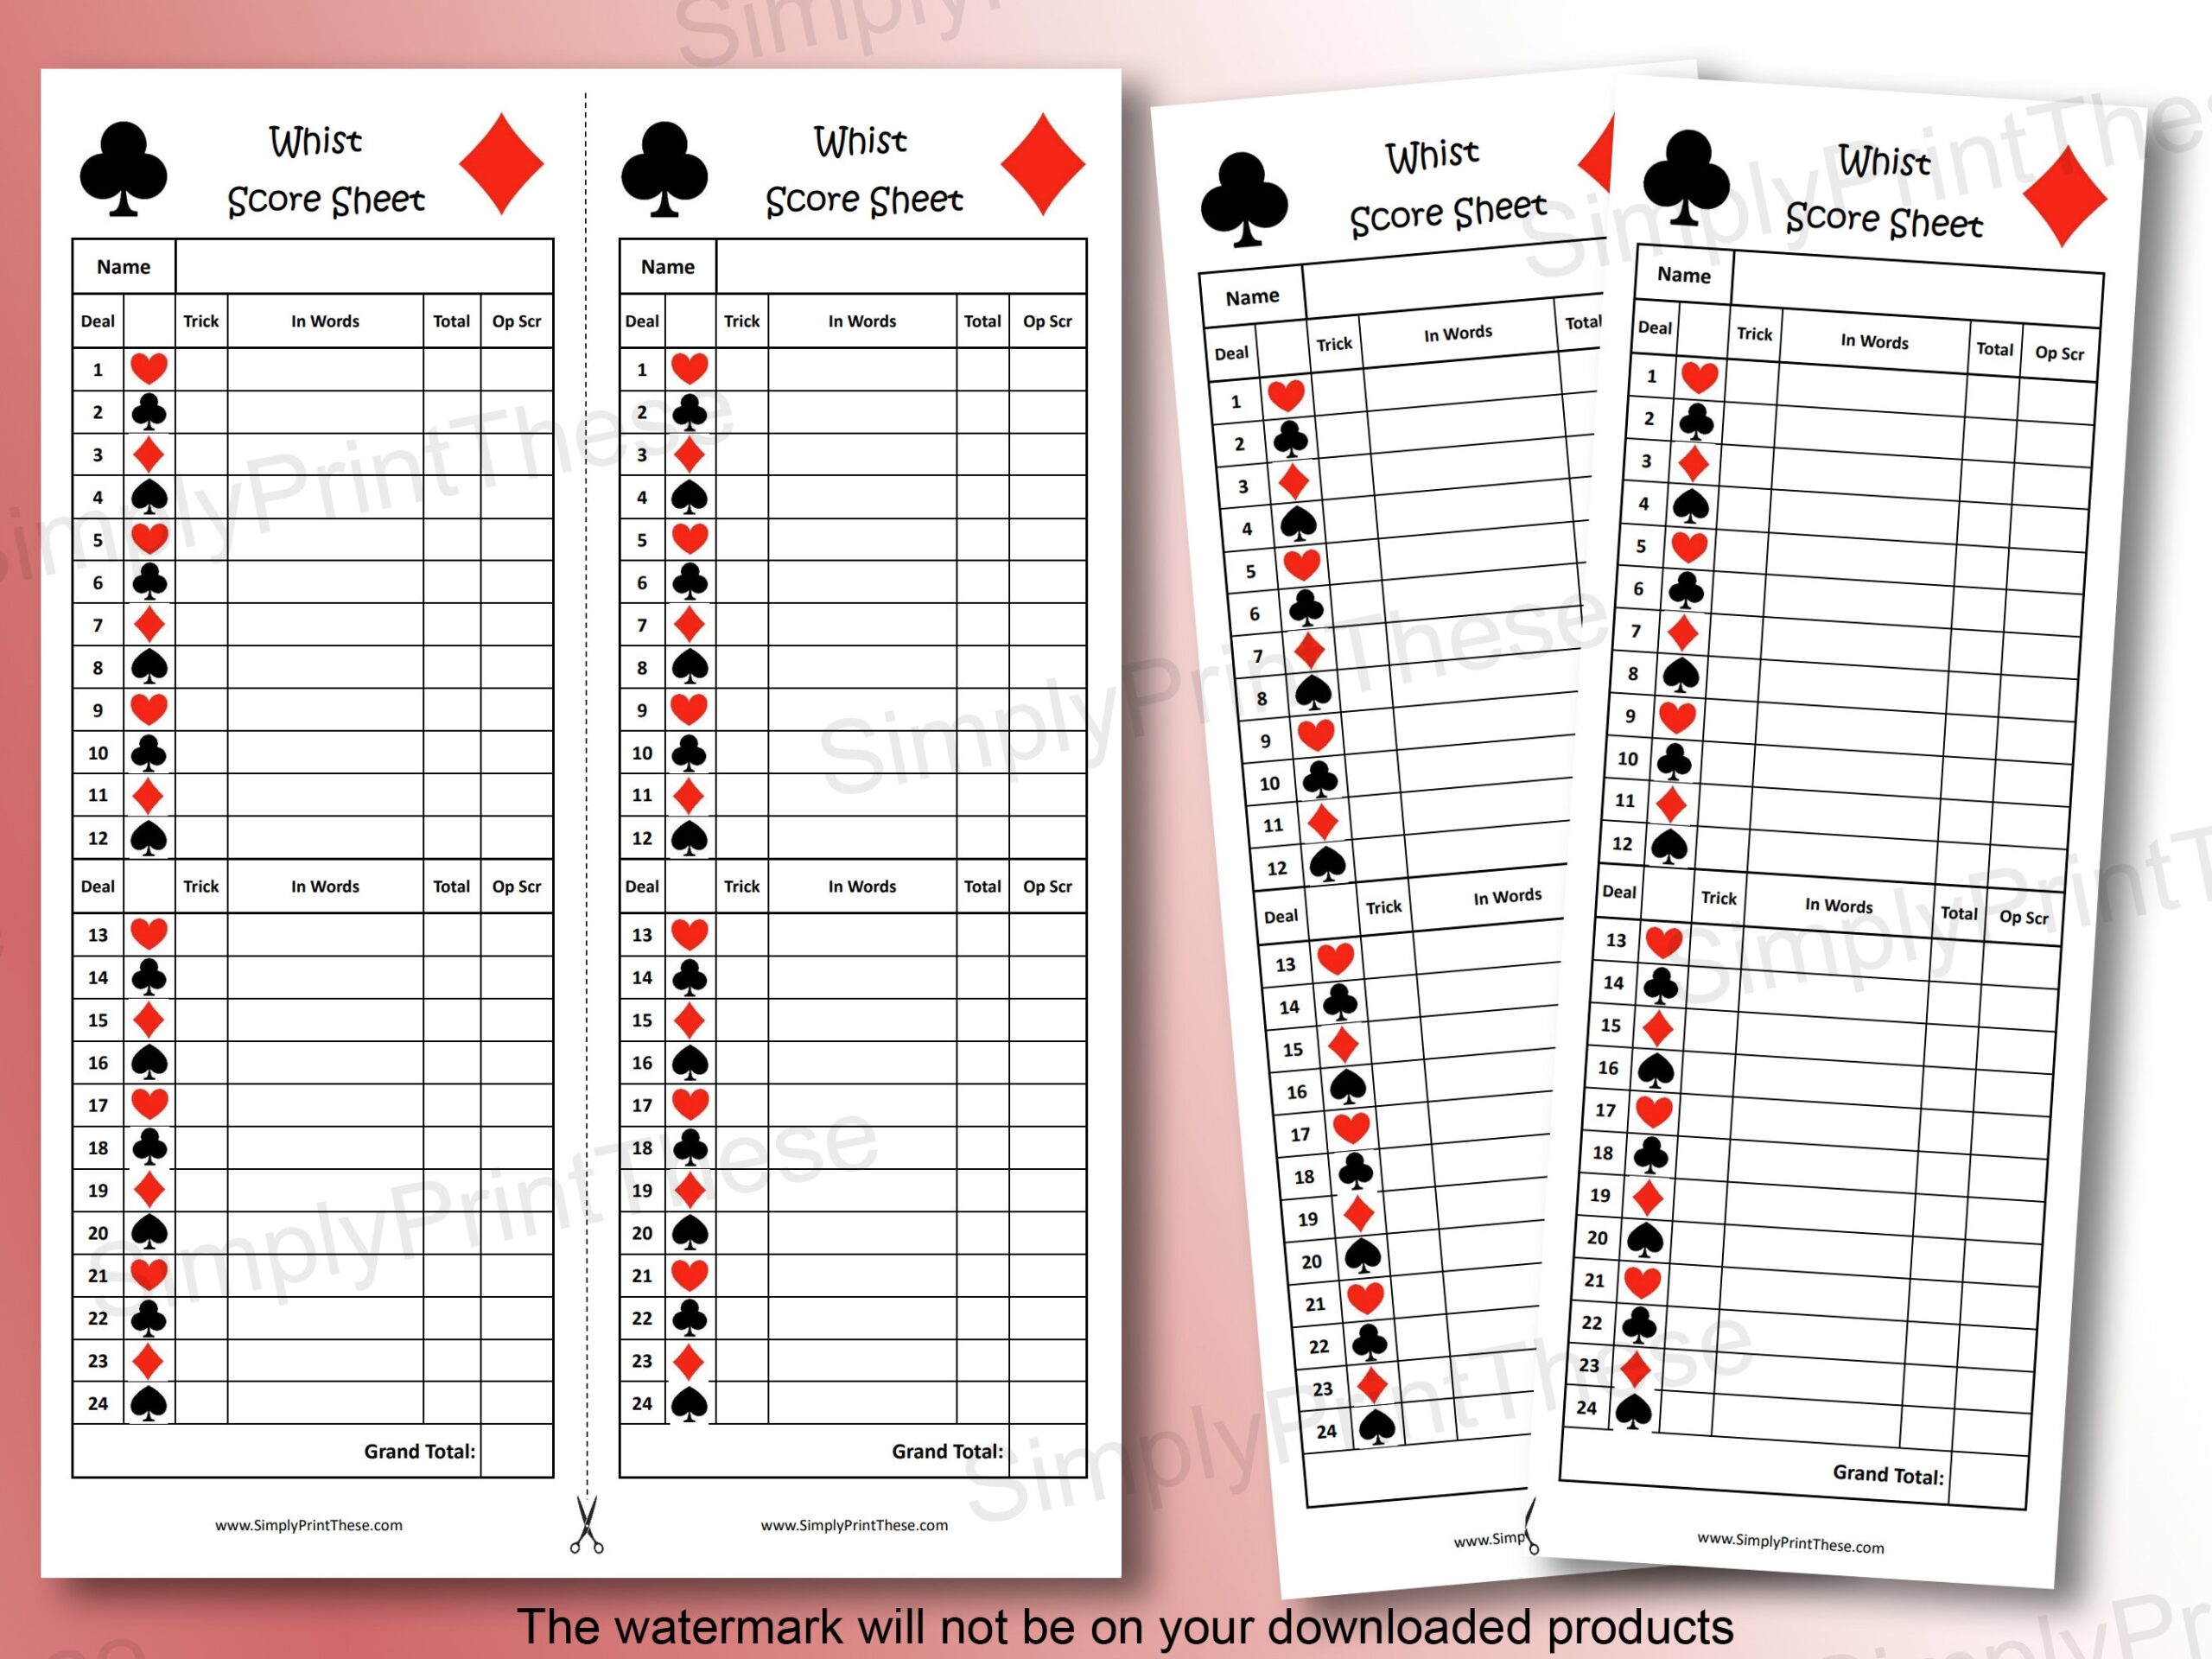 Printable Whist Score Sheets To Record Your Whist Card Games Whist Score Card Learn To Play Whist Instant Download Etsy